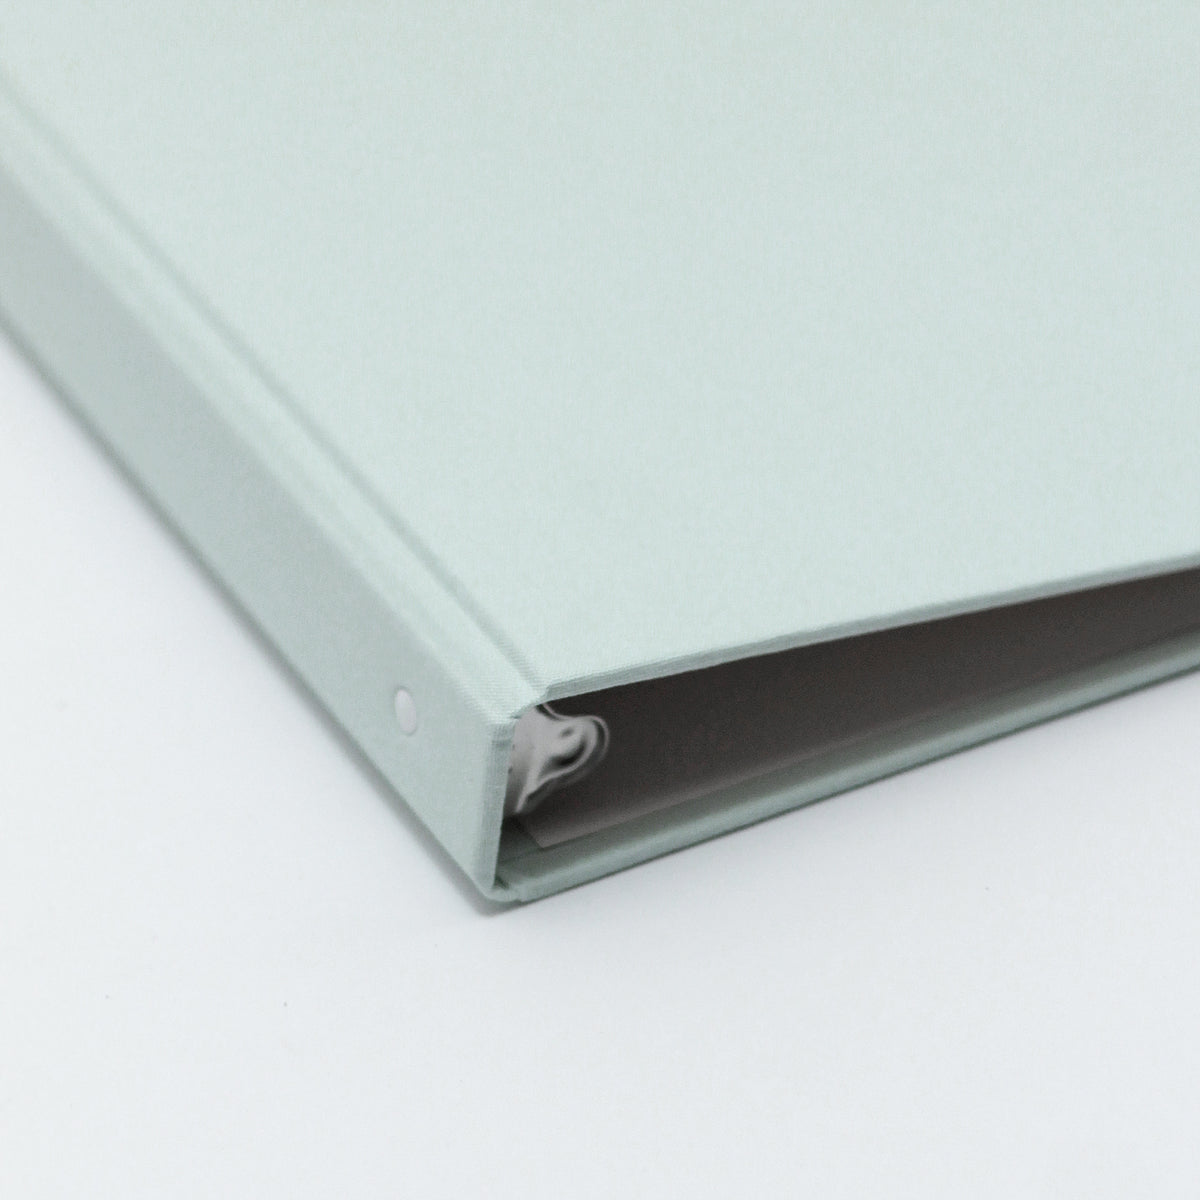 Large Photo Binder (for 4 x 6 photos) with Pastel Blue Cotton Cover